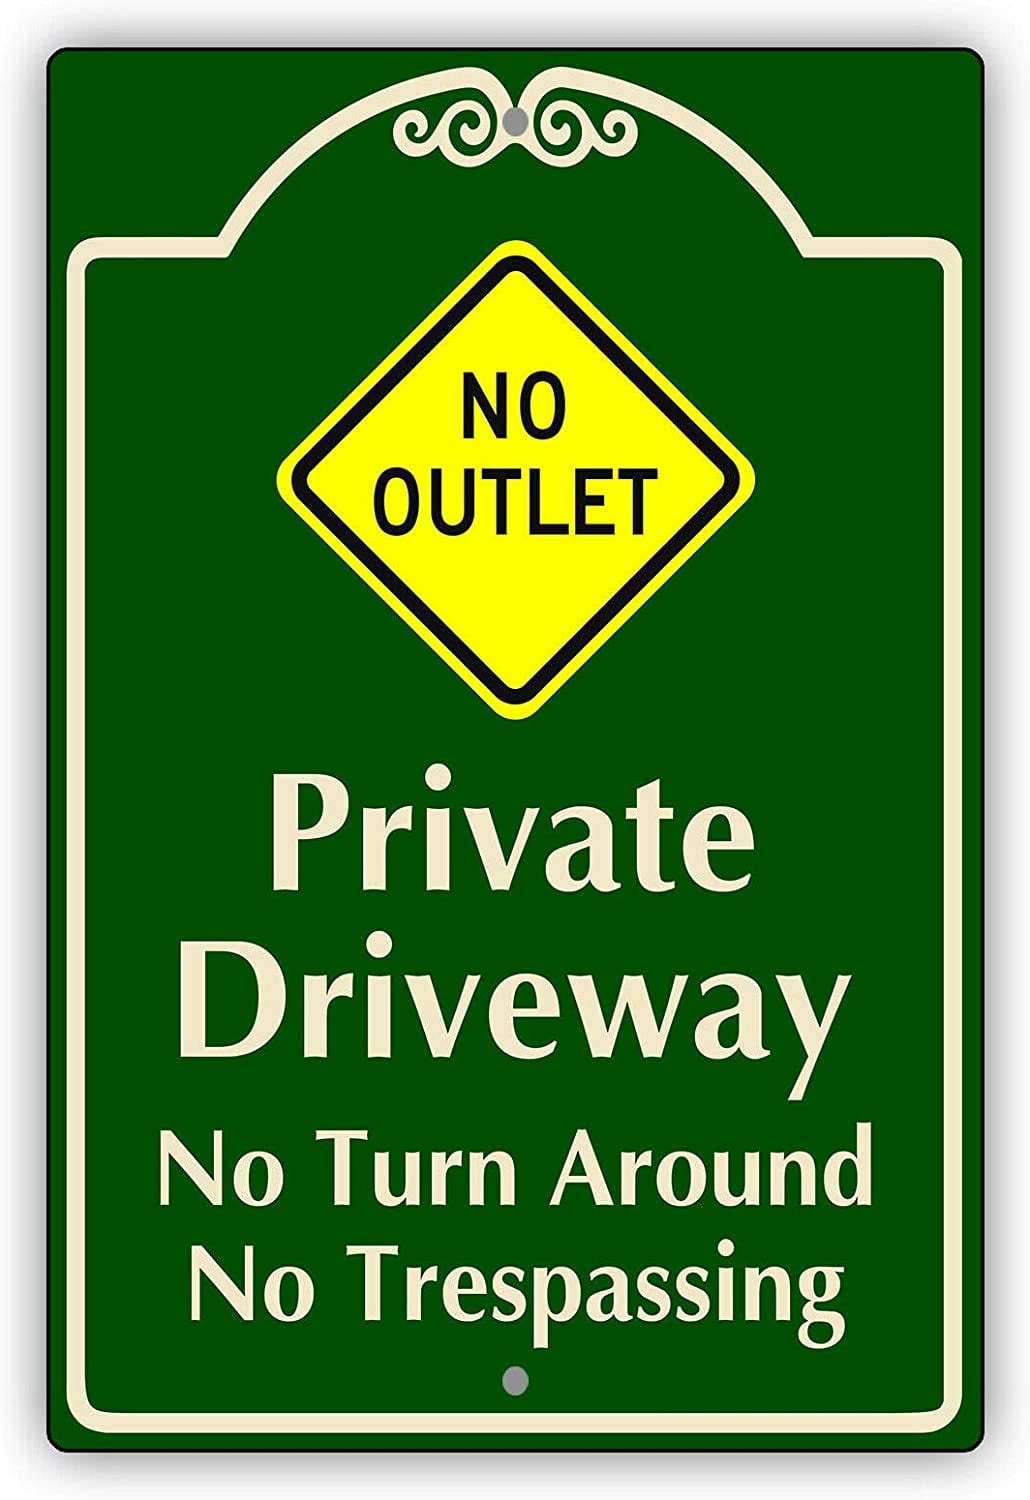 Private Driveway No Stopping Or Turning safety sign 